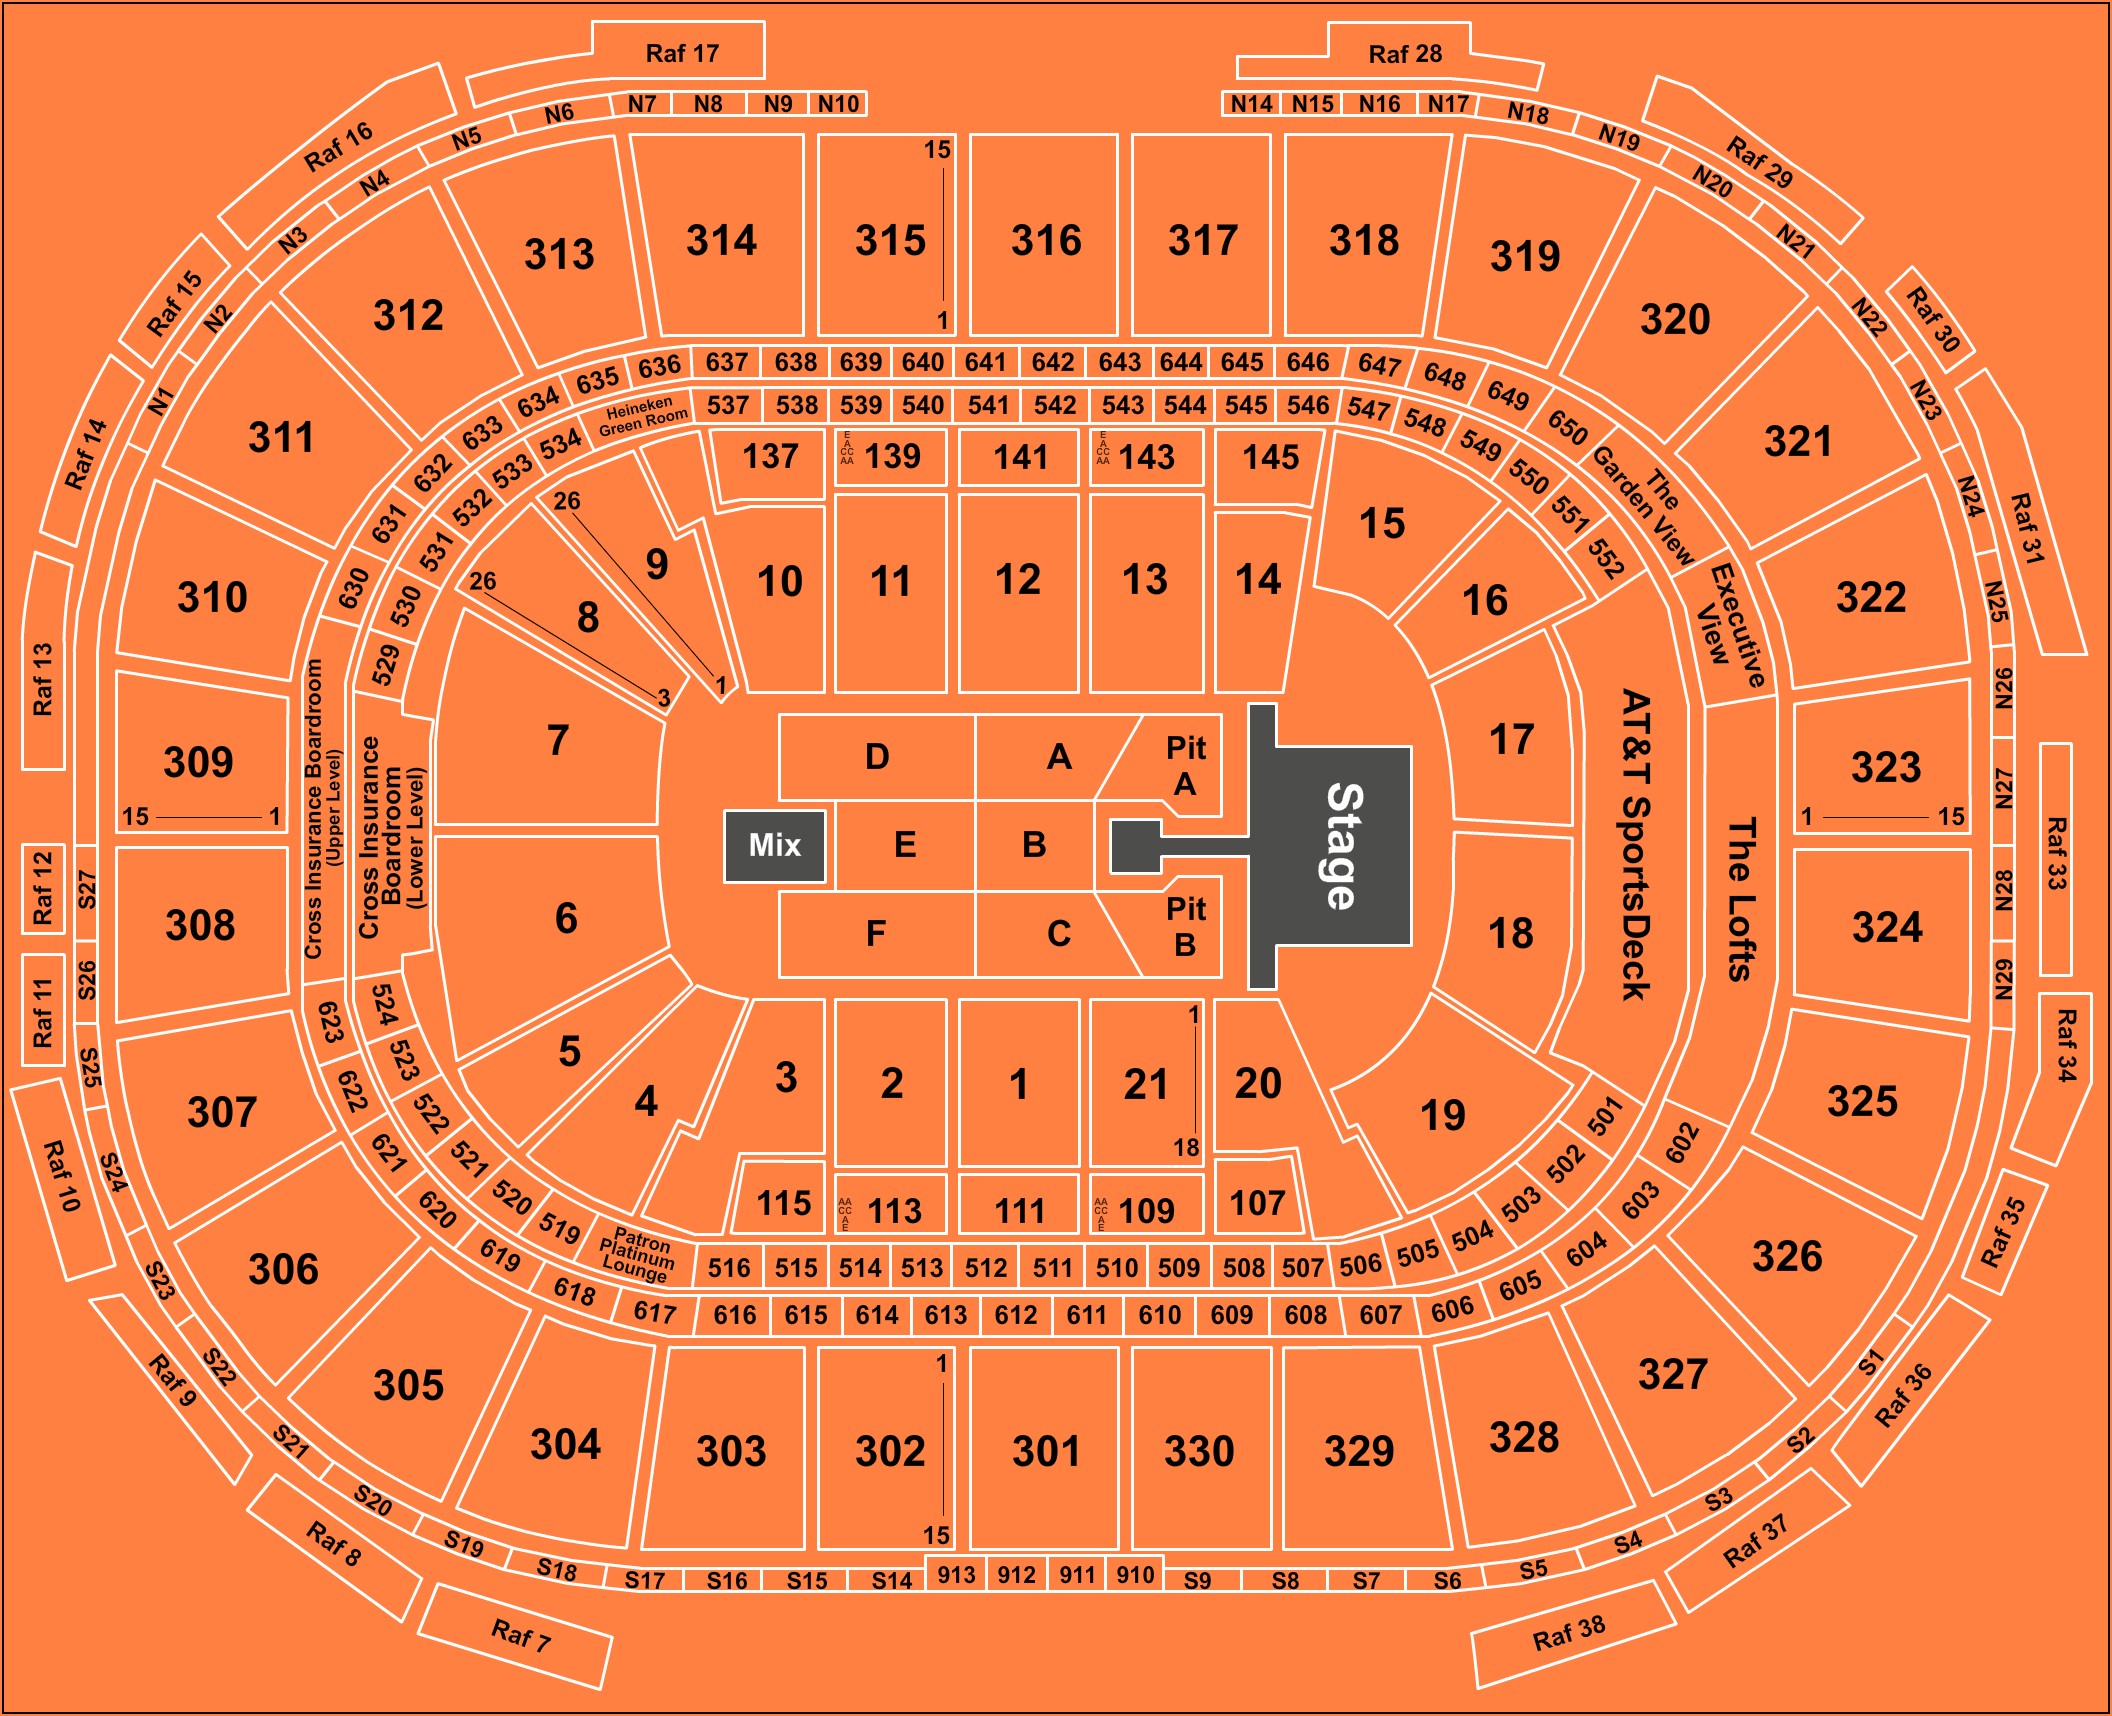 Td Garden Seating Map With Rows